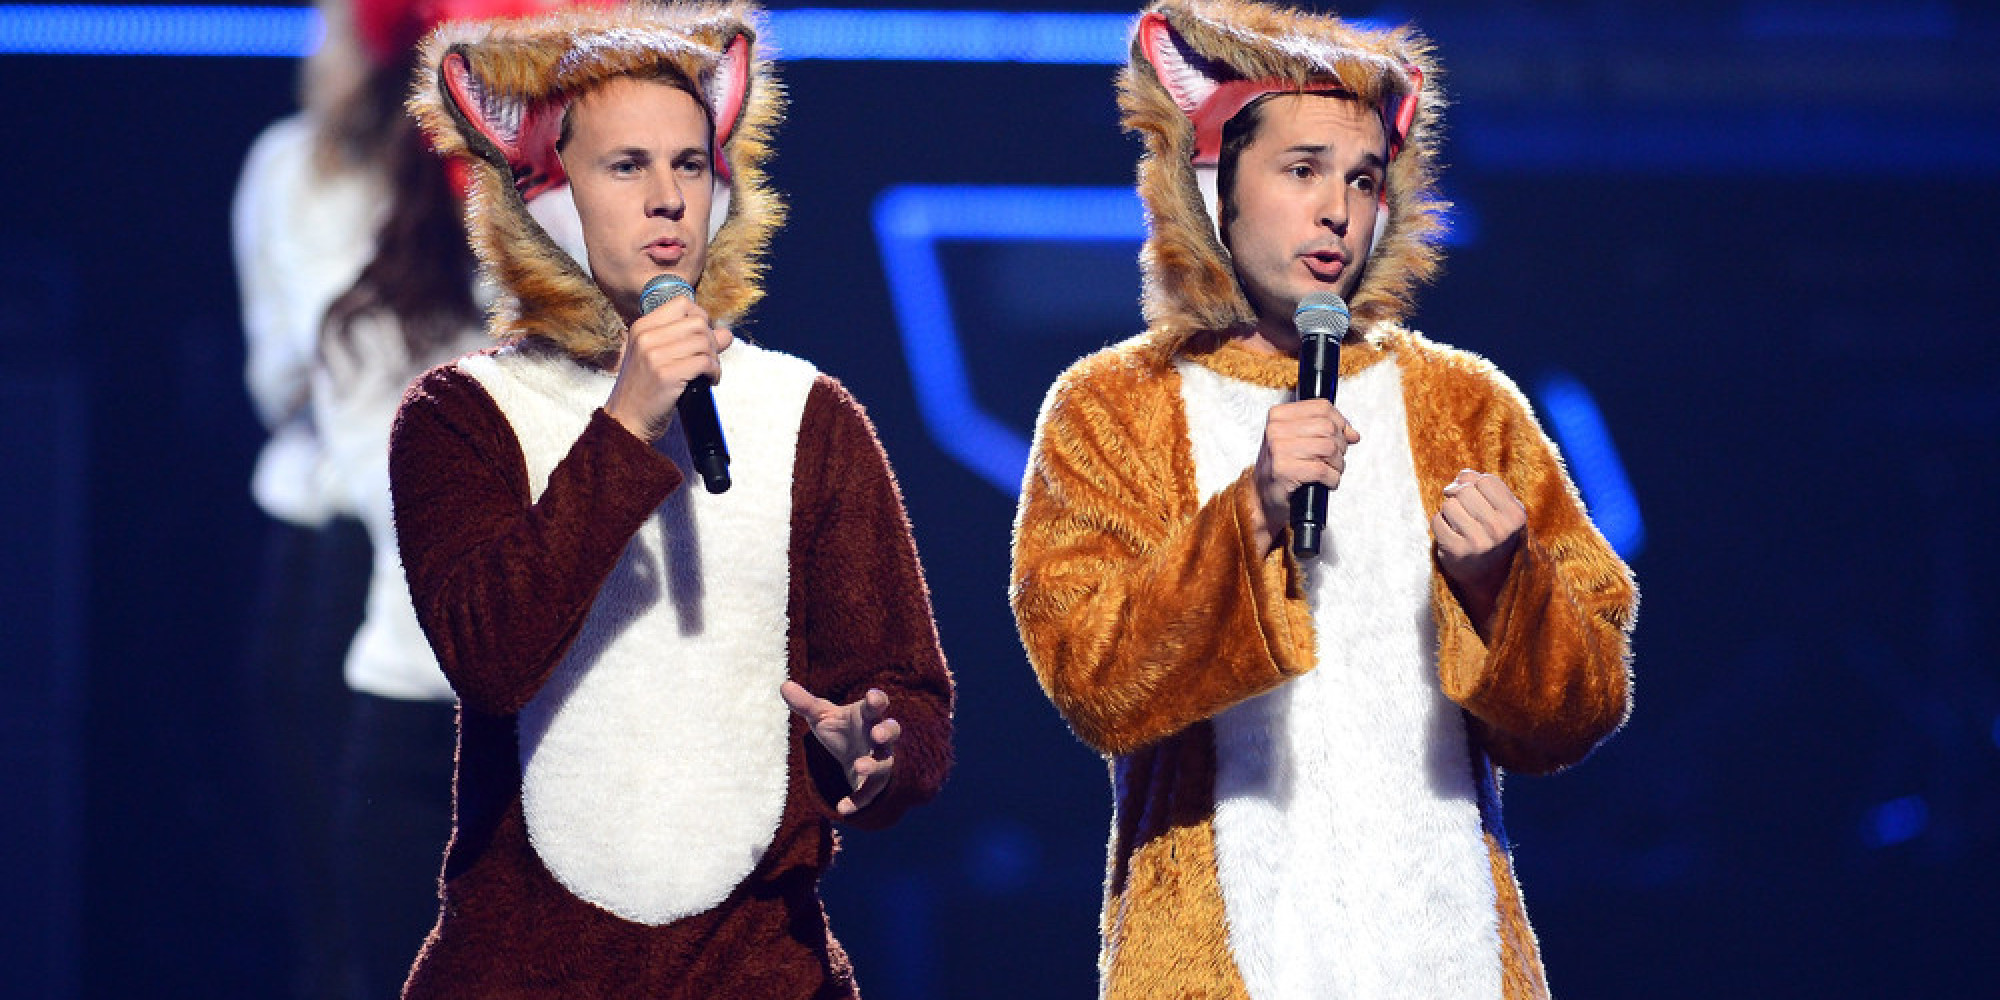 Ylvis in the video What does the fox say wallpapers and images - wallpapers, pictures, photos